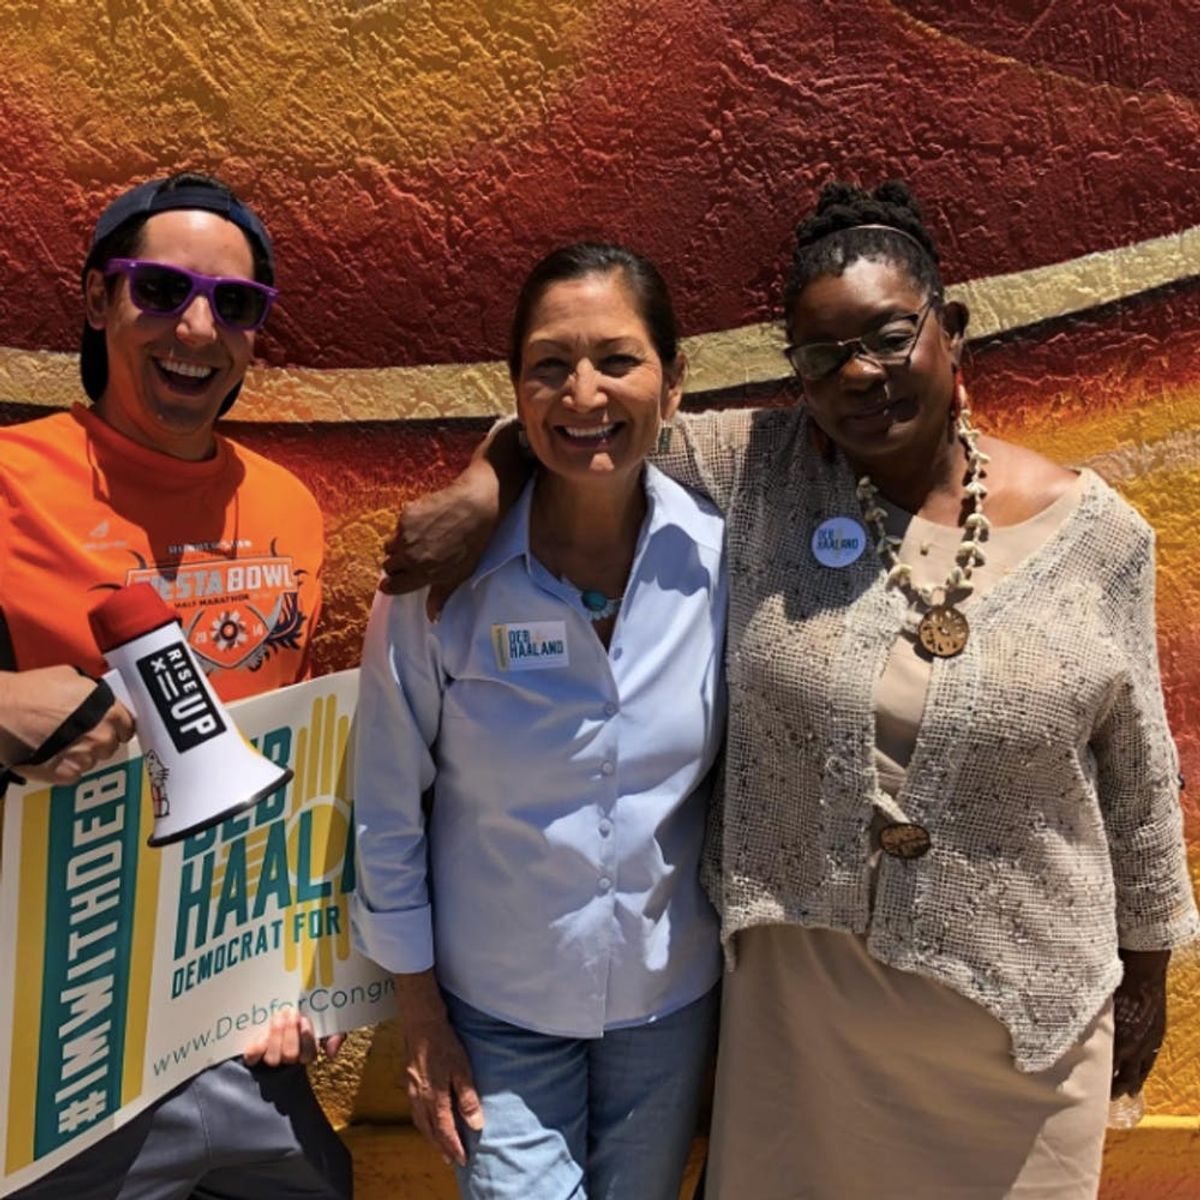 Deb Haaland’s New Mexico Primary Win Could Make Her the First Indigenous Congresswoman in US History